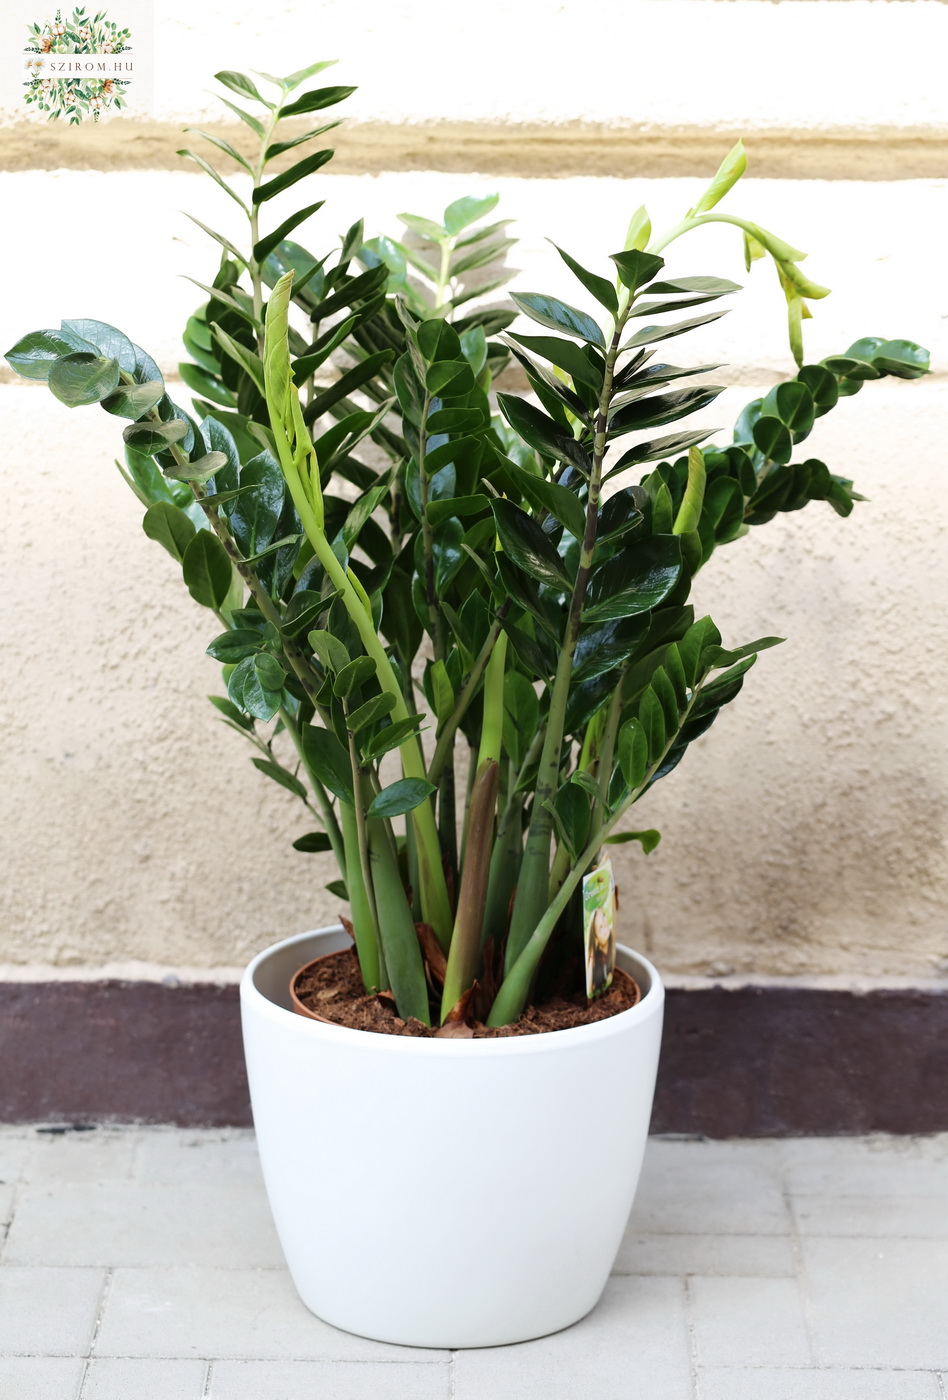 flower delivery Budapest - Zamioculcas zamiifolia with pot 110cm - indoor plant